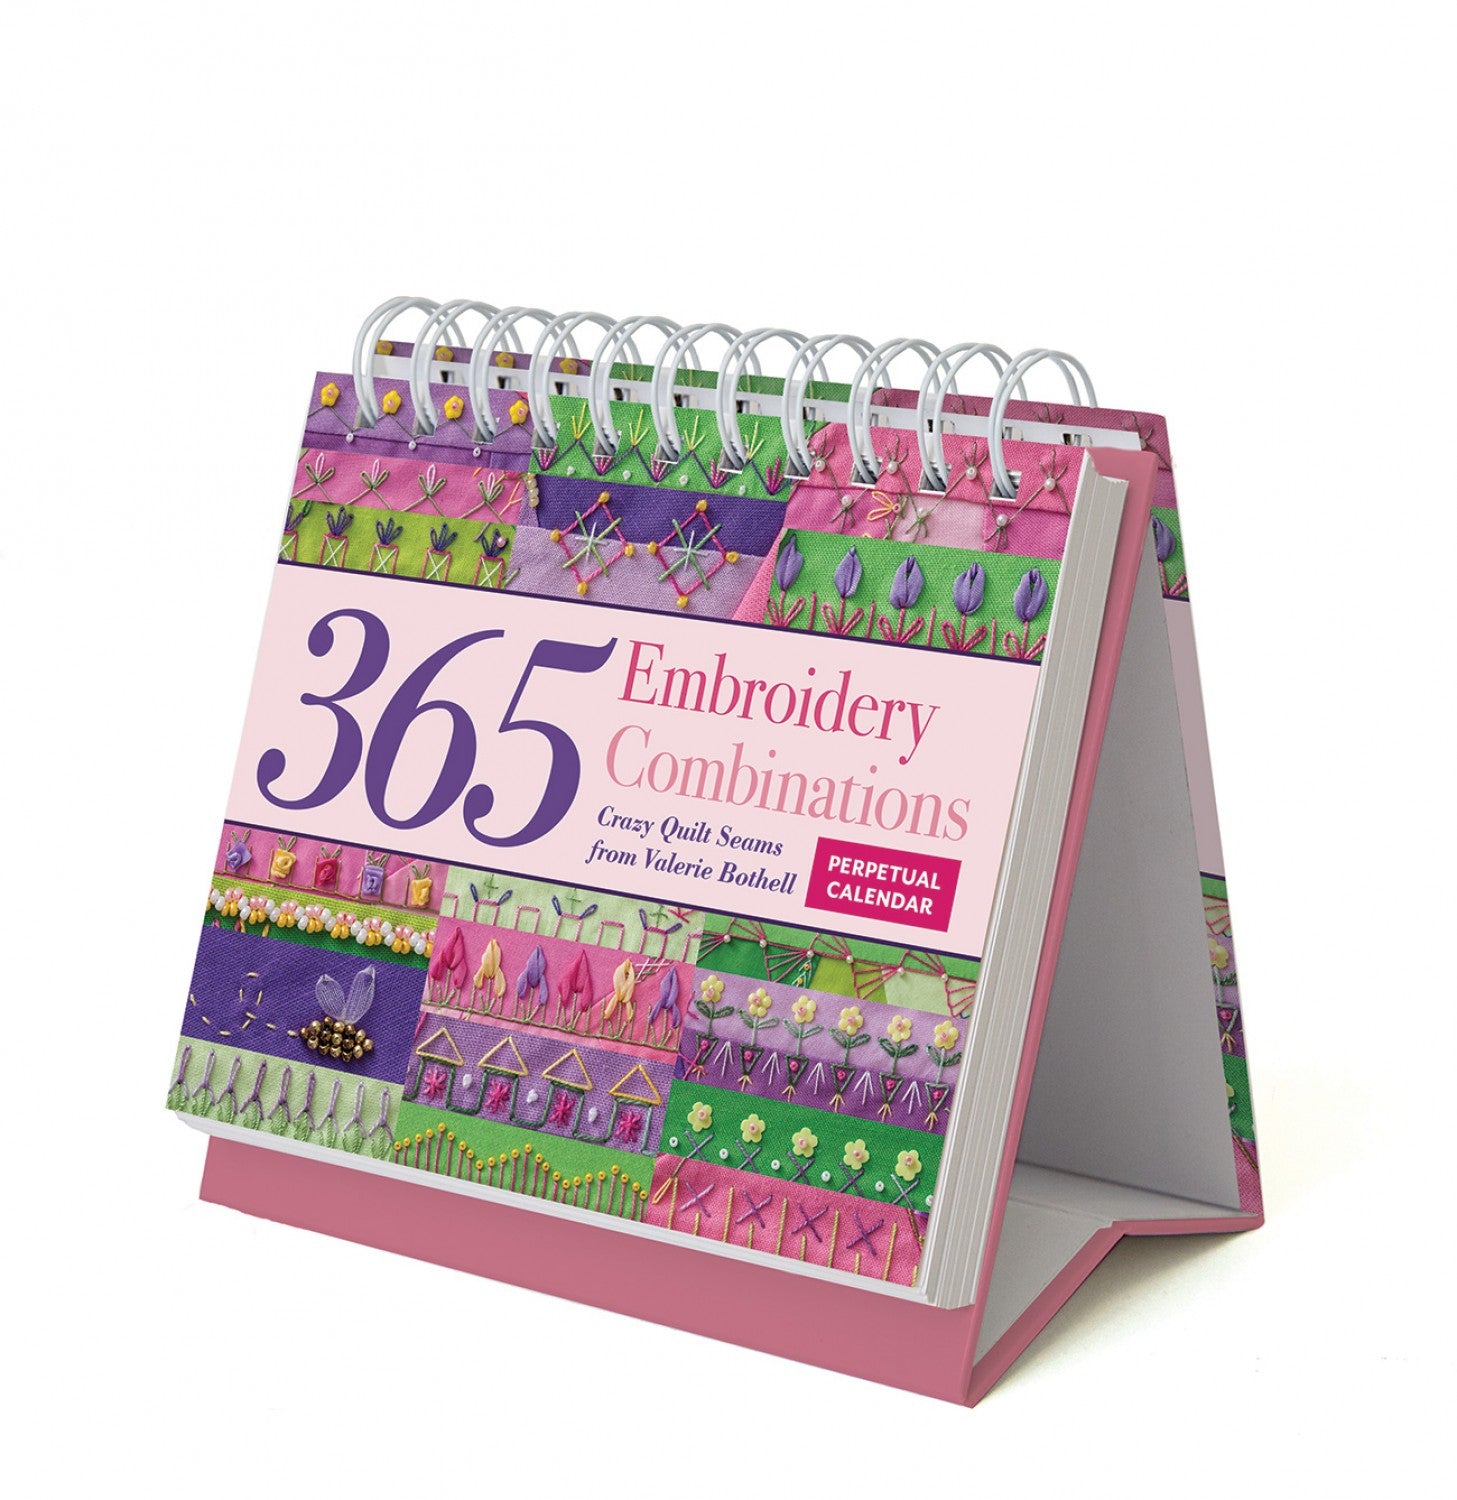 Embroidery Combinations Perpetual Calendar by Valerie Bothell for C&T Publishing